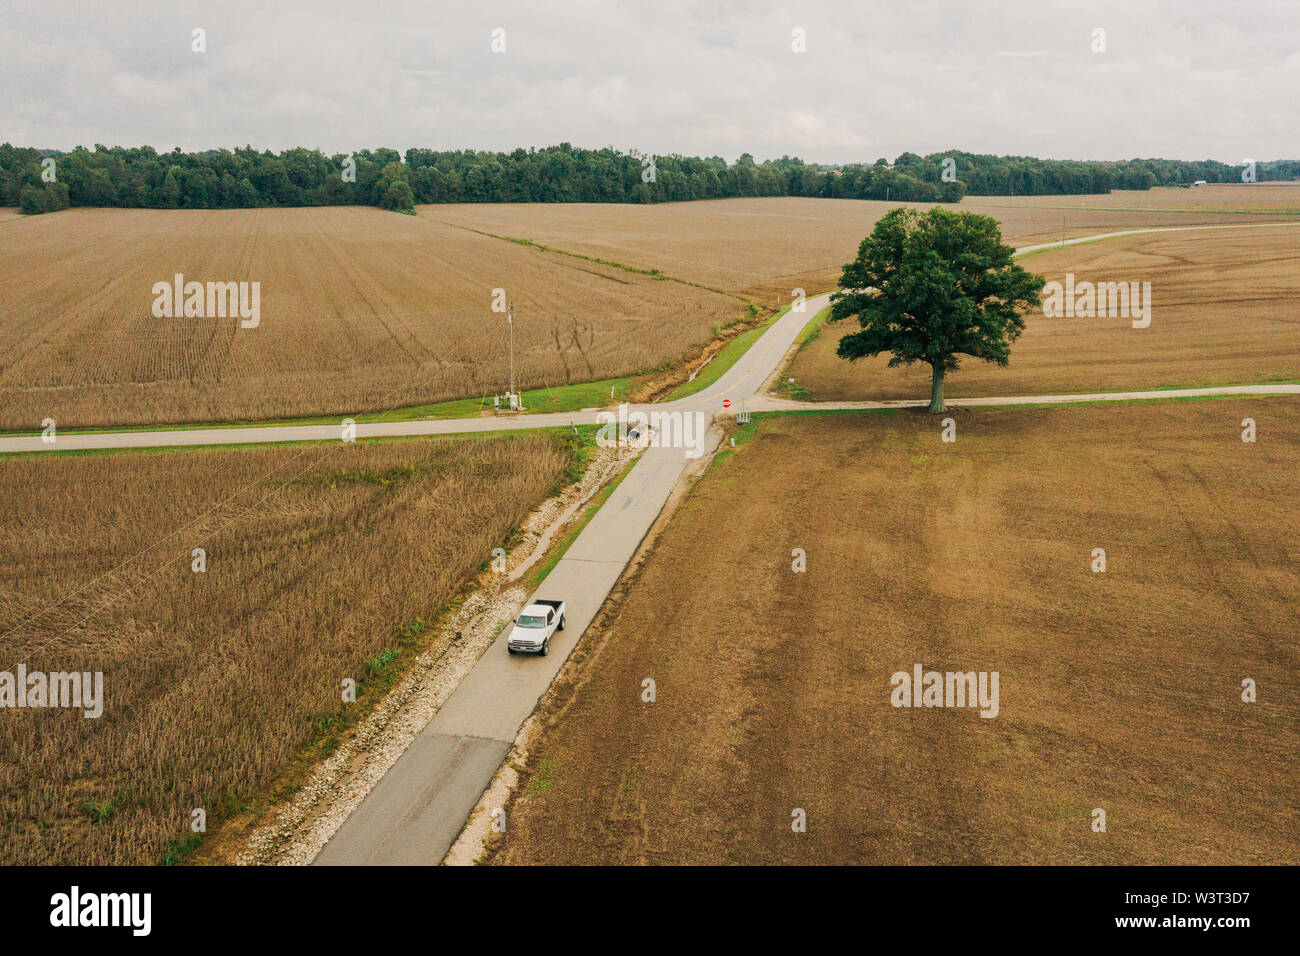 Pickup truck on country road Stock Photo